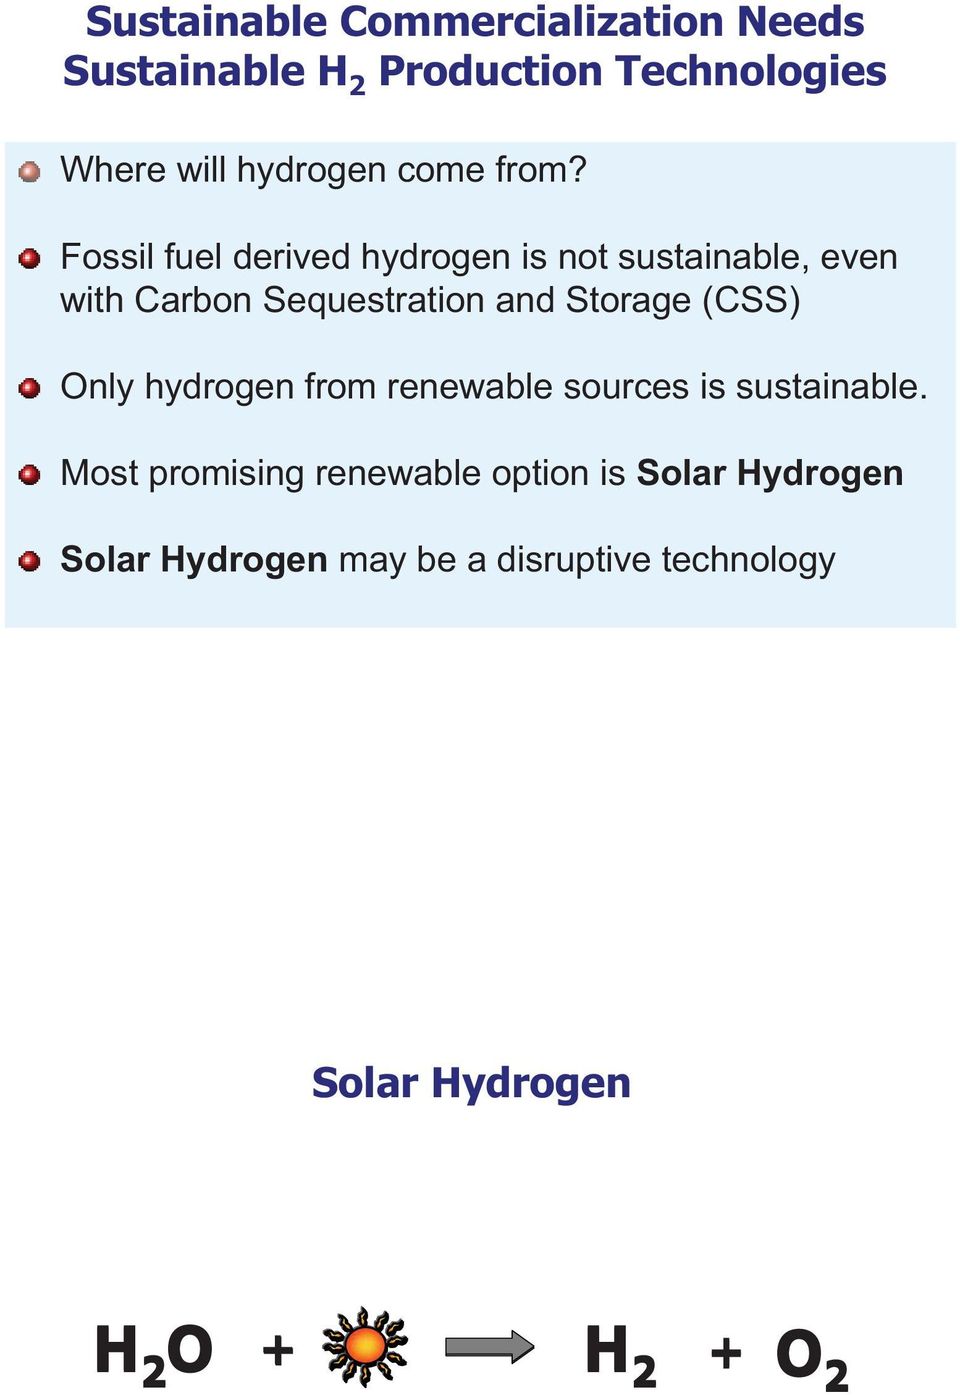 Fossil fuel derived hydrogen is not sustainable, even with Carbon Sequestration and Storage (CSS)